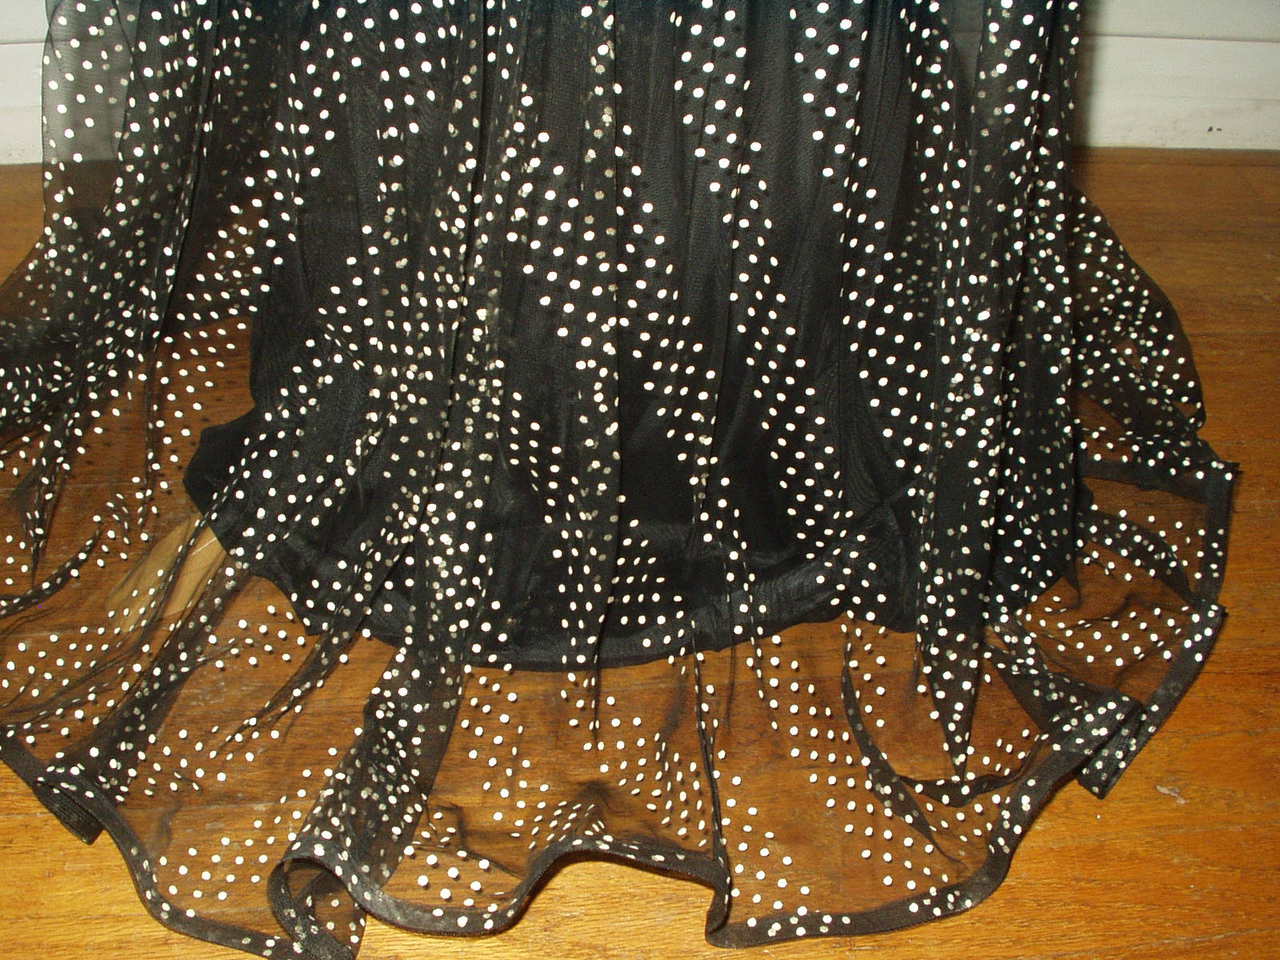 Vintage 1930 Evening Gown Party Formal Dress Sheer Black Dotted Swiss ...